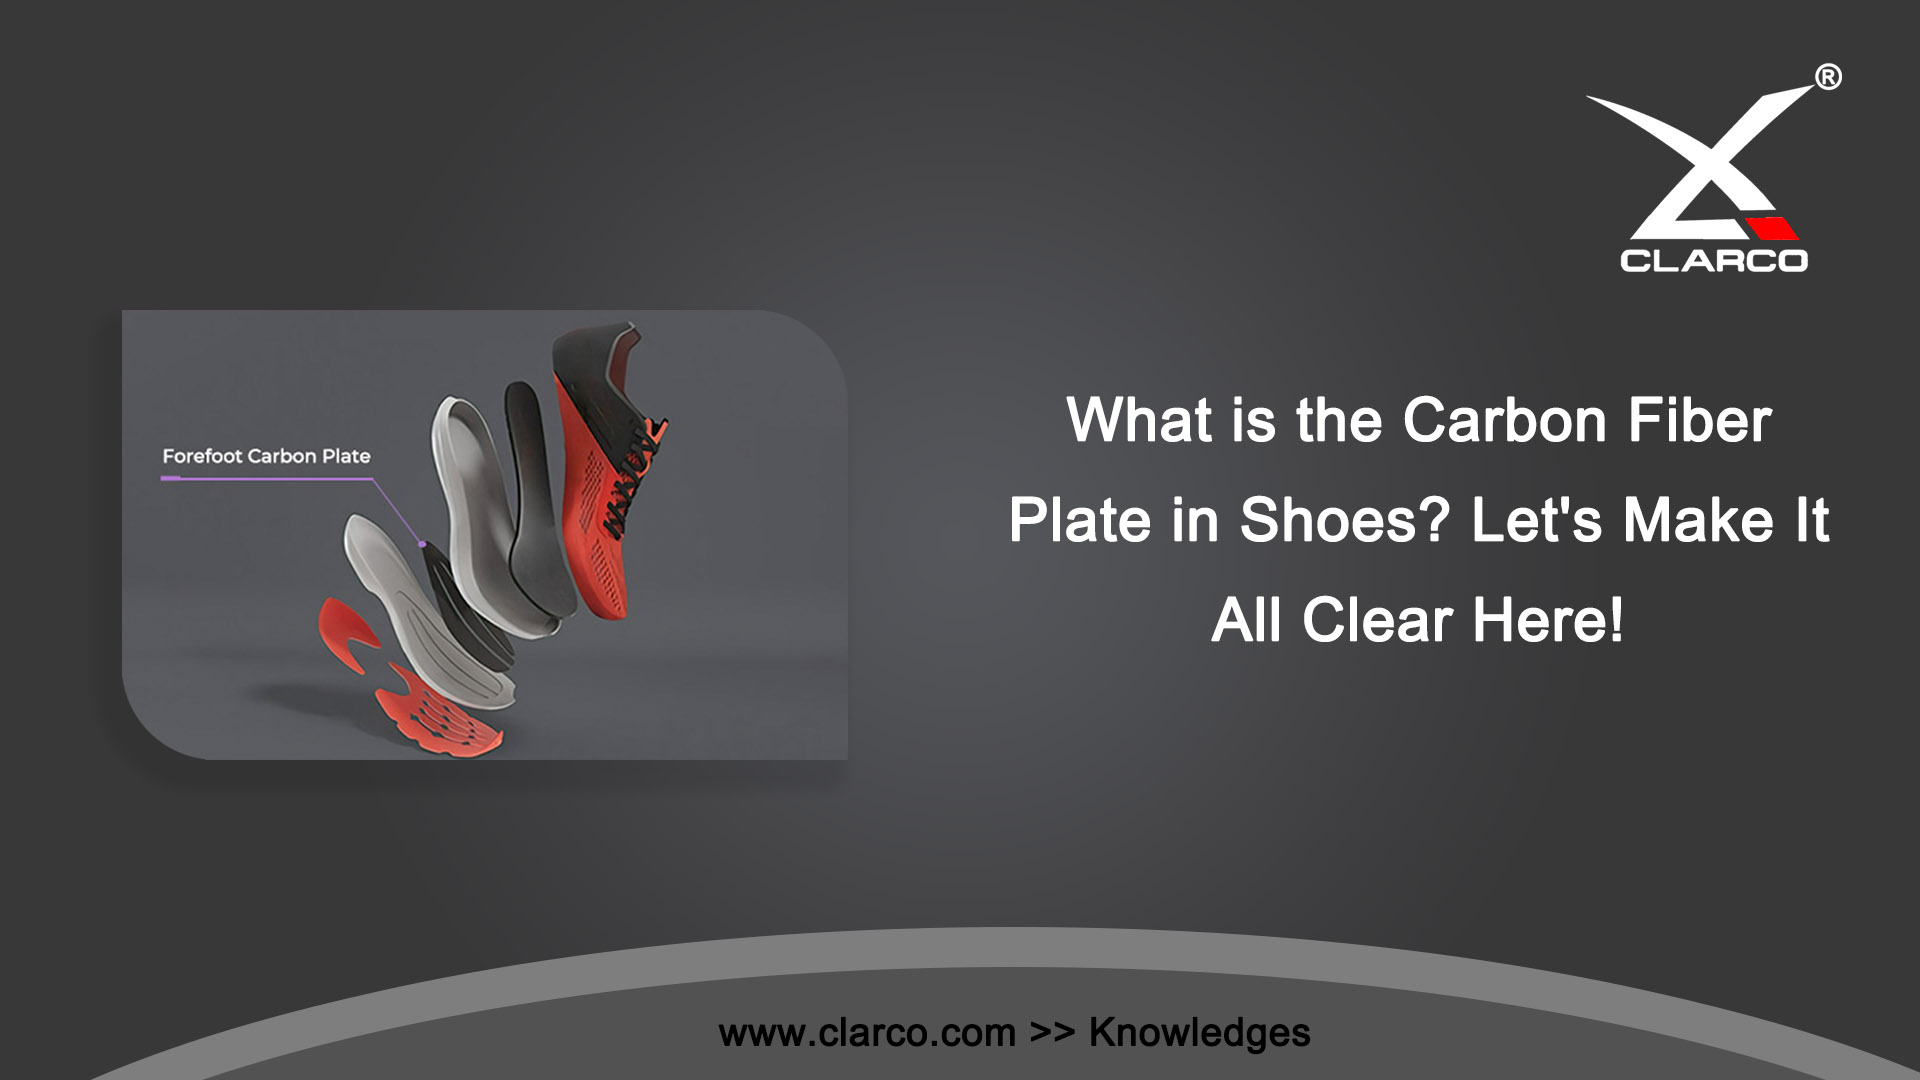 What is the Carbon Fiber Plate in Shoes